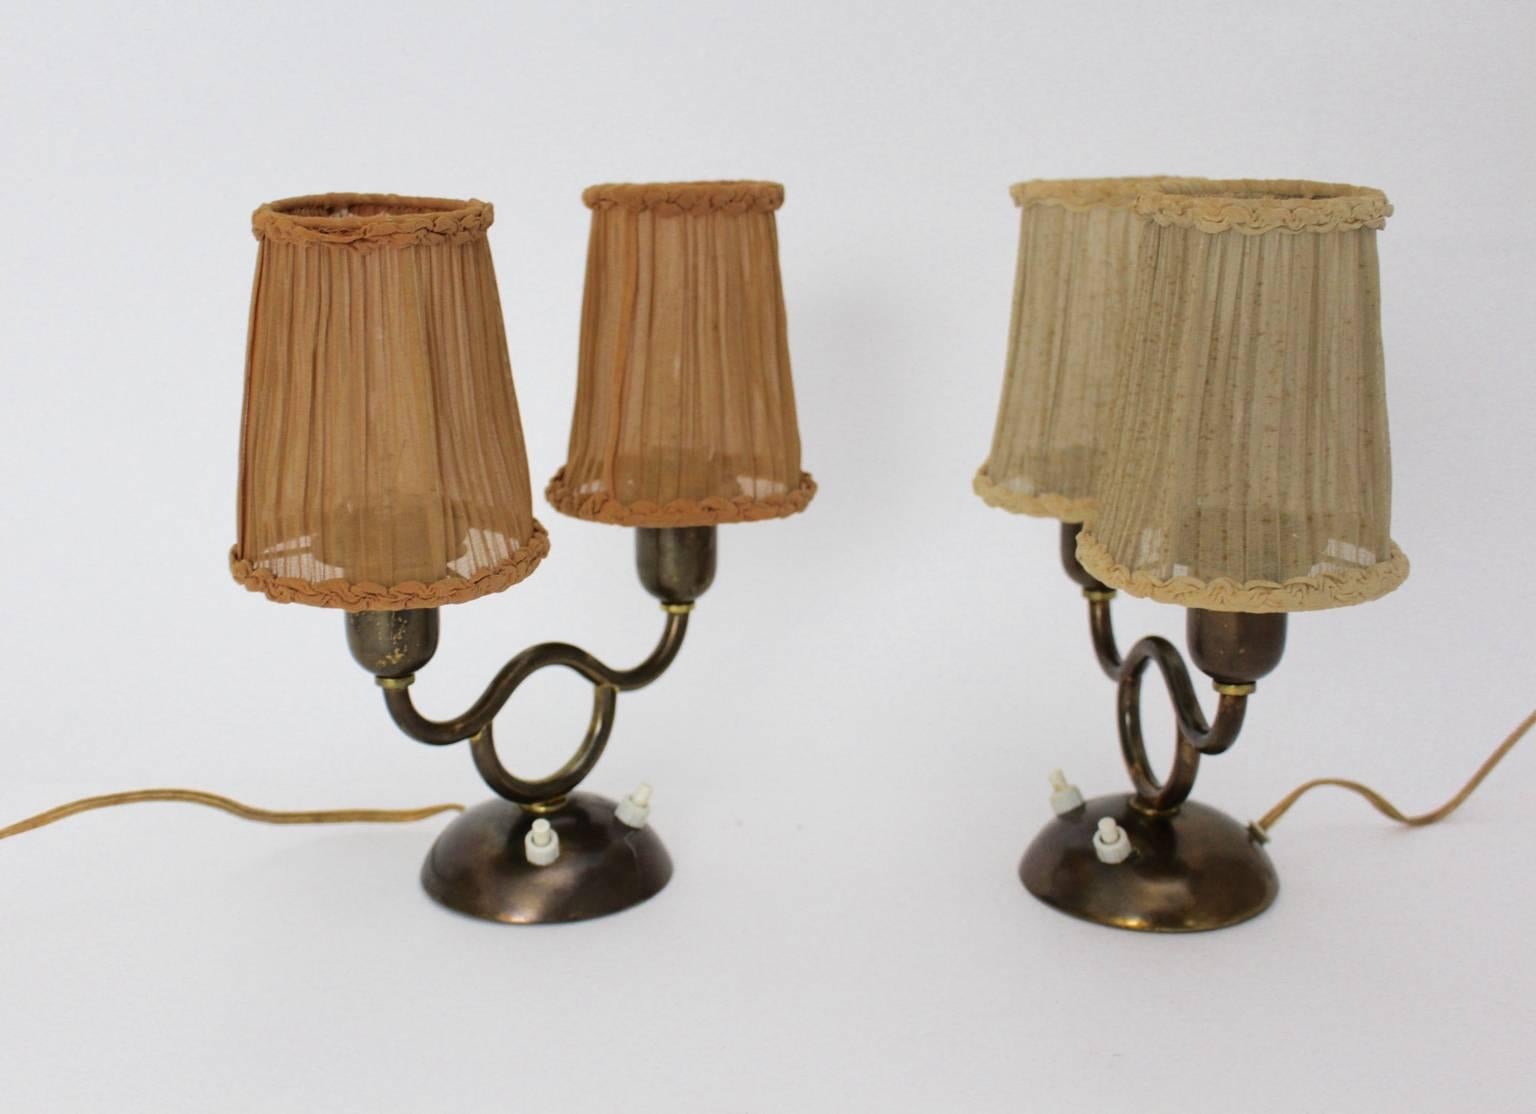 Art Deco Josef Frank vintage table lamps from brass Vienna 1930s.
A rare original brass pair of table lamps or bedside lamps, each with two shades and two switches
The table lamps or bedside lamps show a pleated vintage lamp shade in earthen